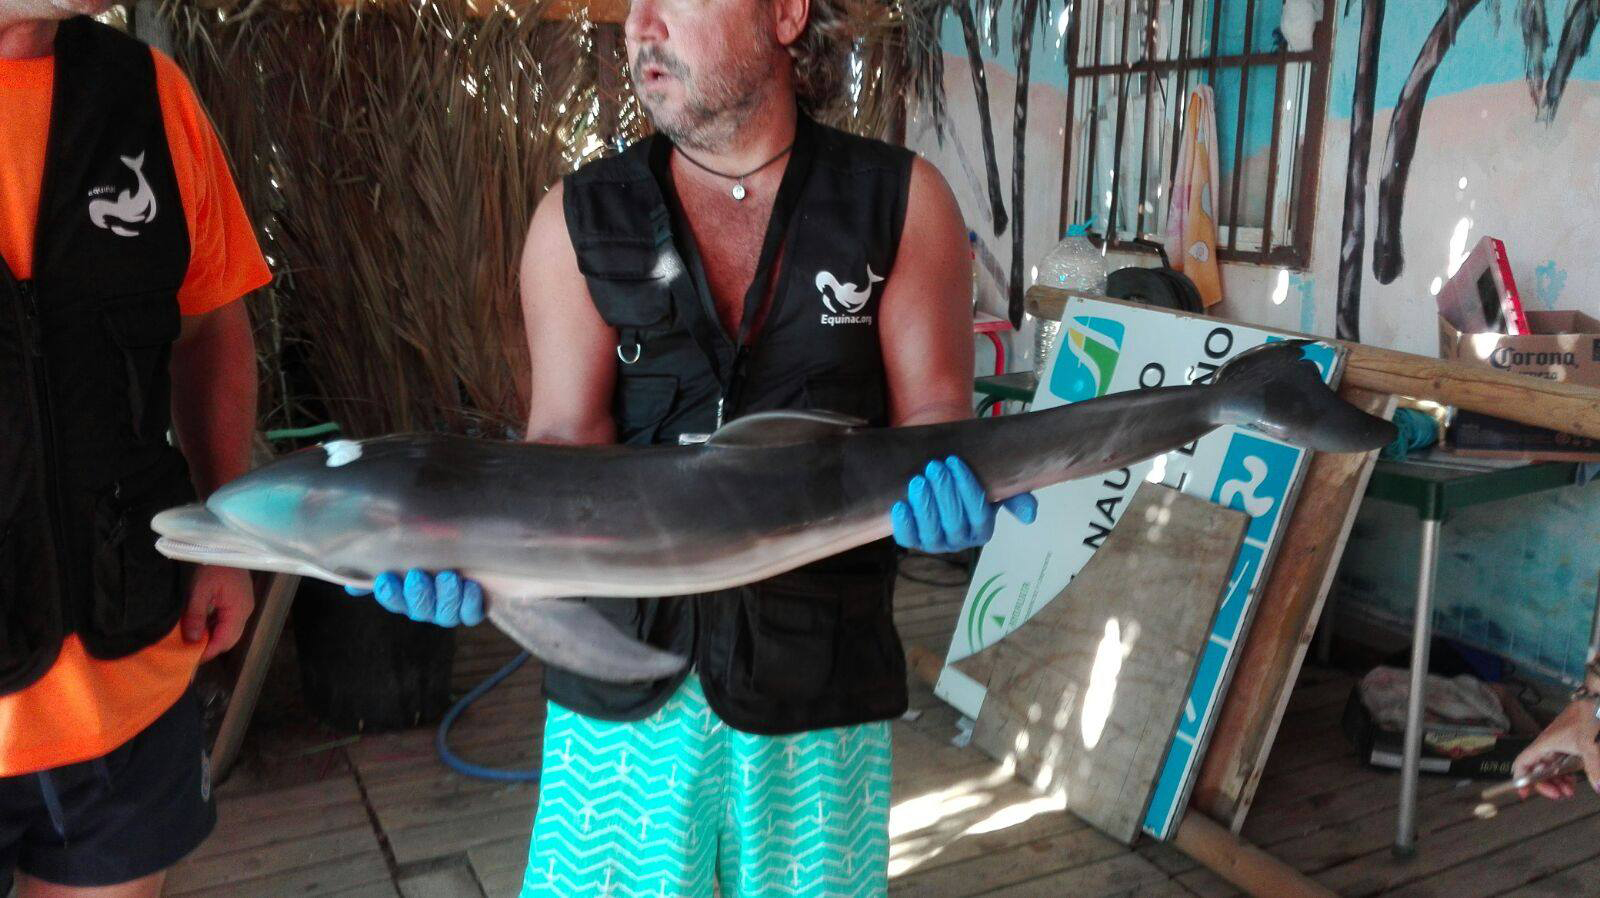 A man holds a dolphin that the group Equinac reported had died in Spain in early August after beachgoers touched and posed for selfies with it. (Equinac)